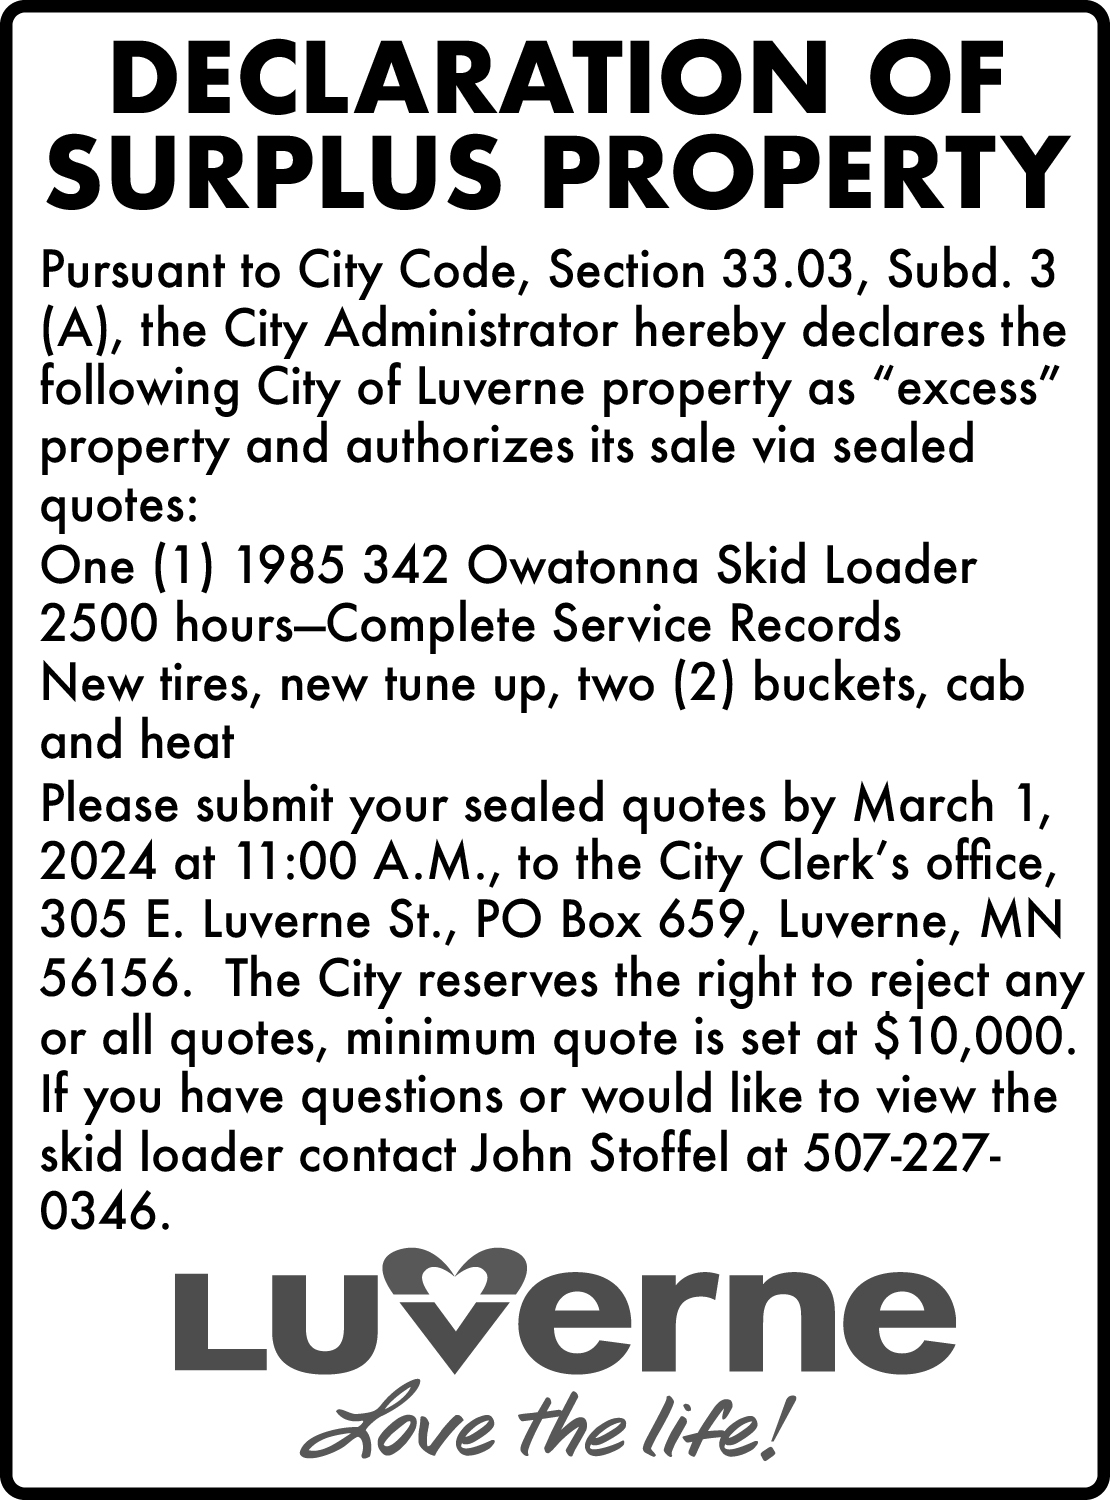 City of Luverne - Declaration of Surplus Property